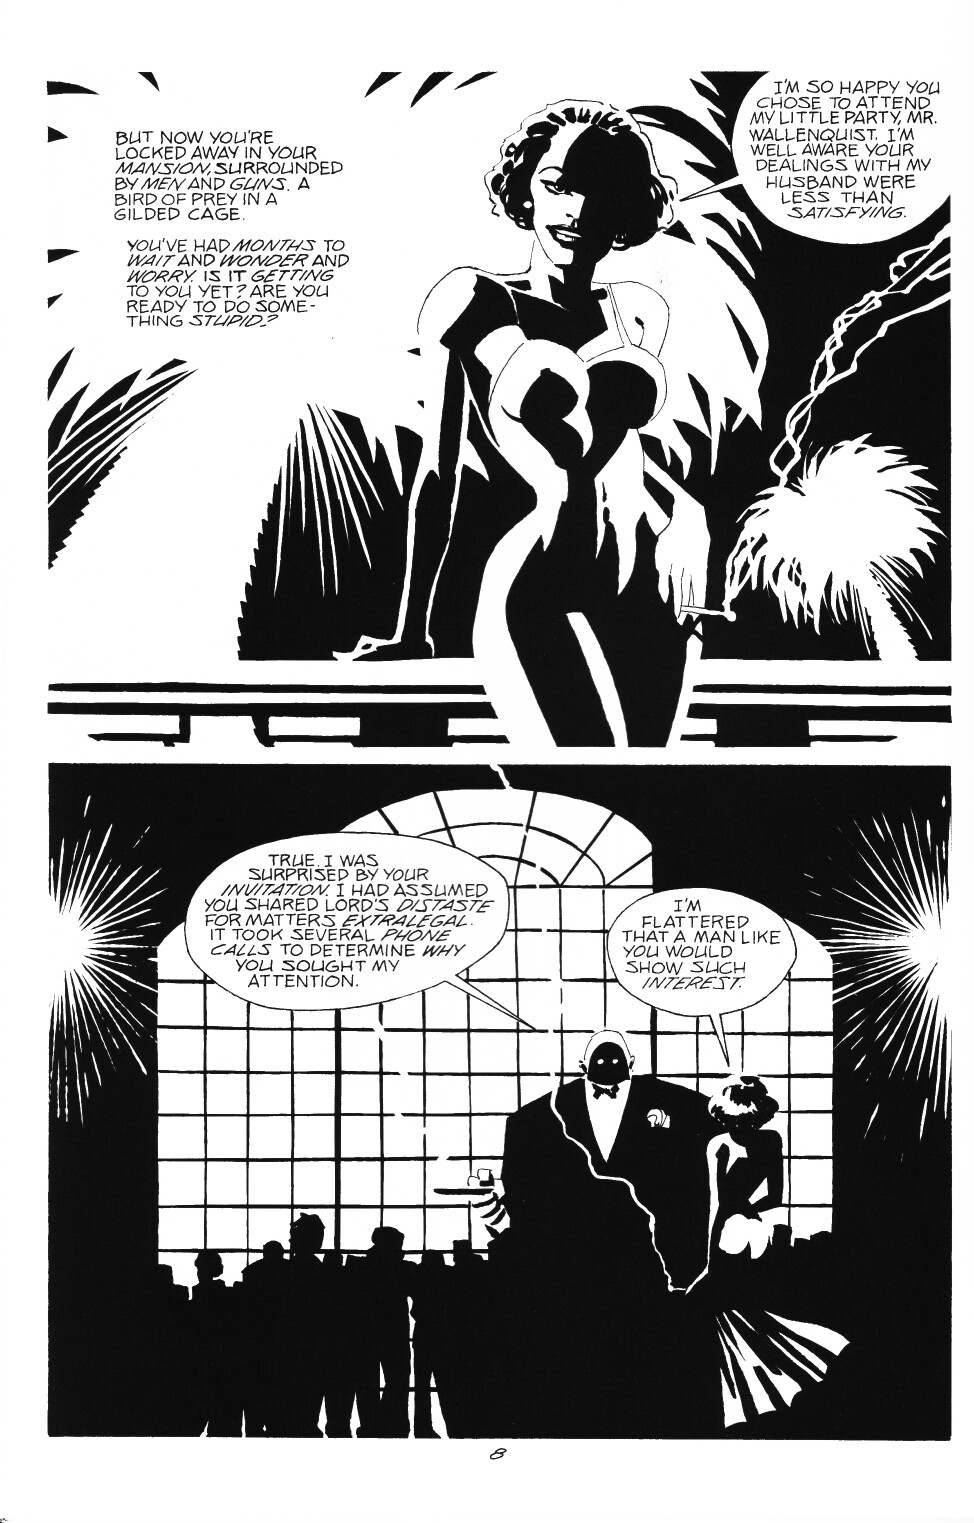 Sin City: A Dame To Kill For Episode 6-A